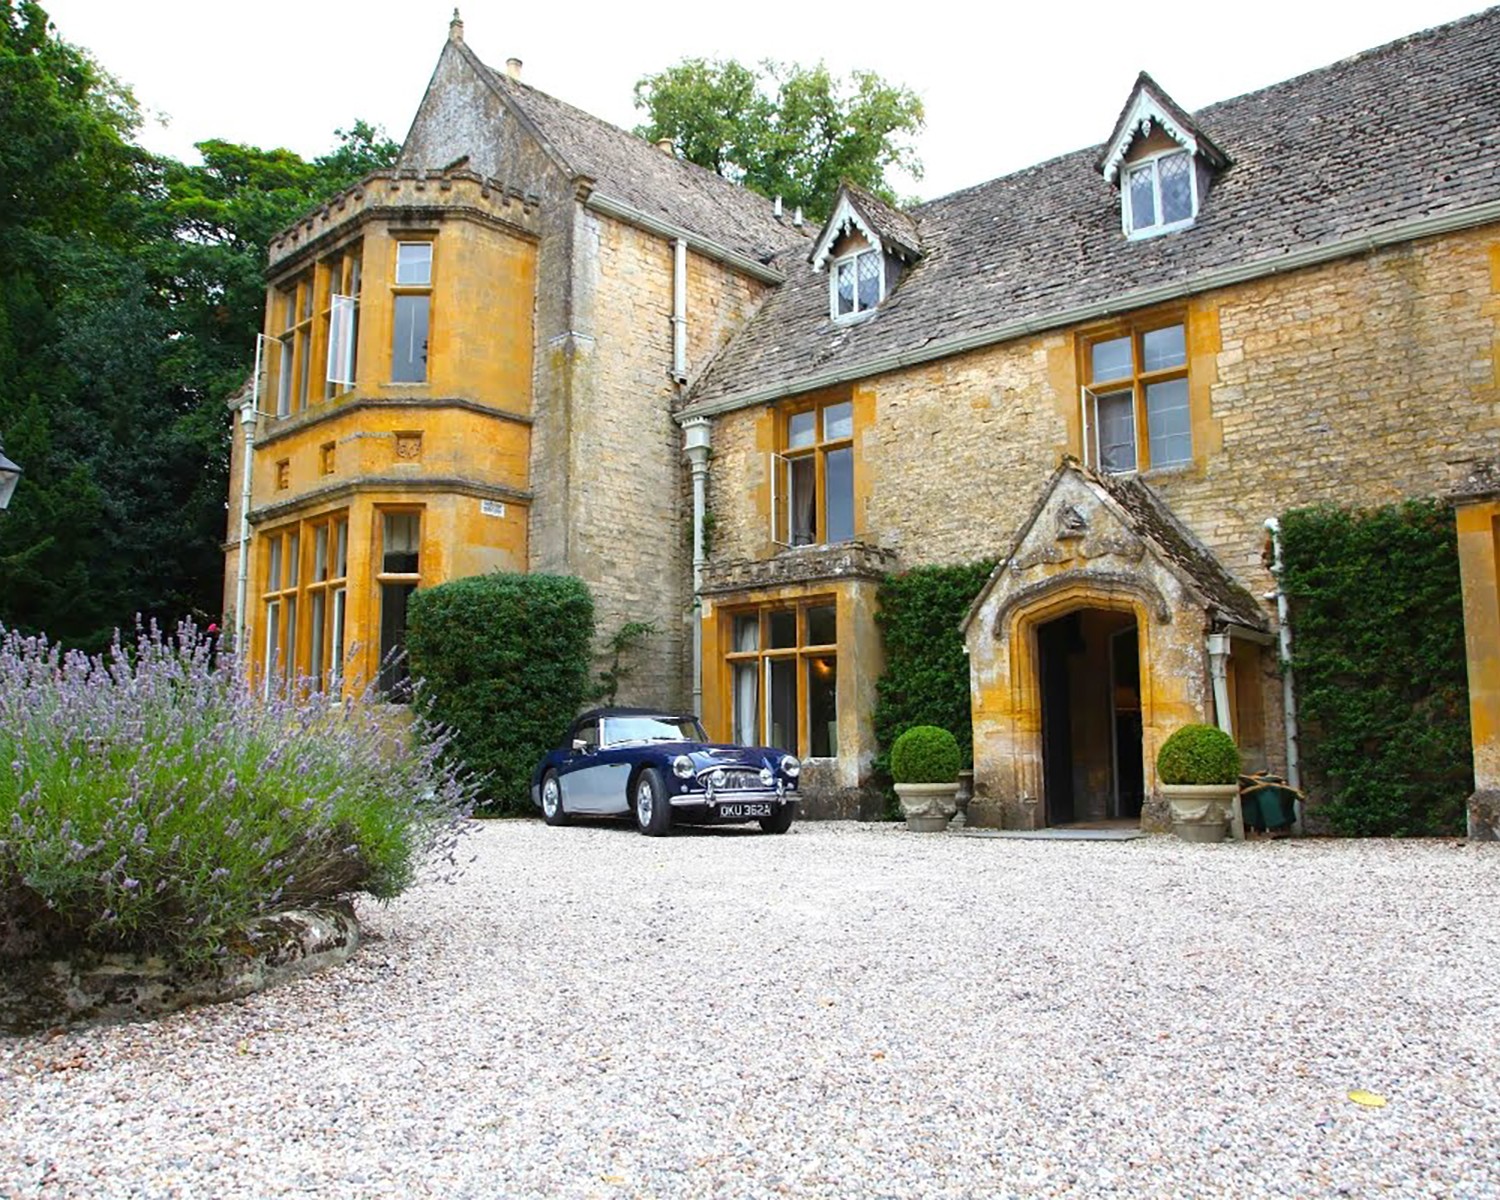 Taste of the Cotswolds at Lords of the Manor Hotel